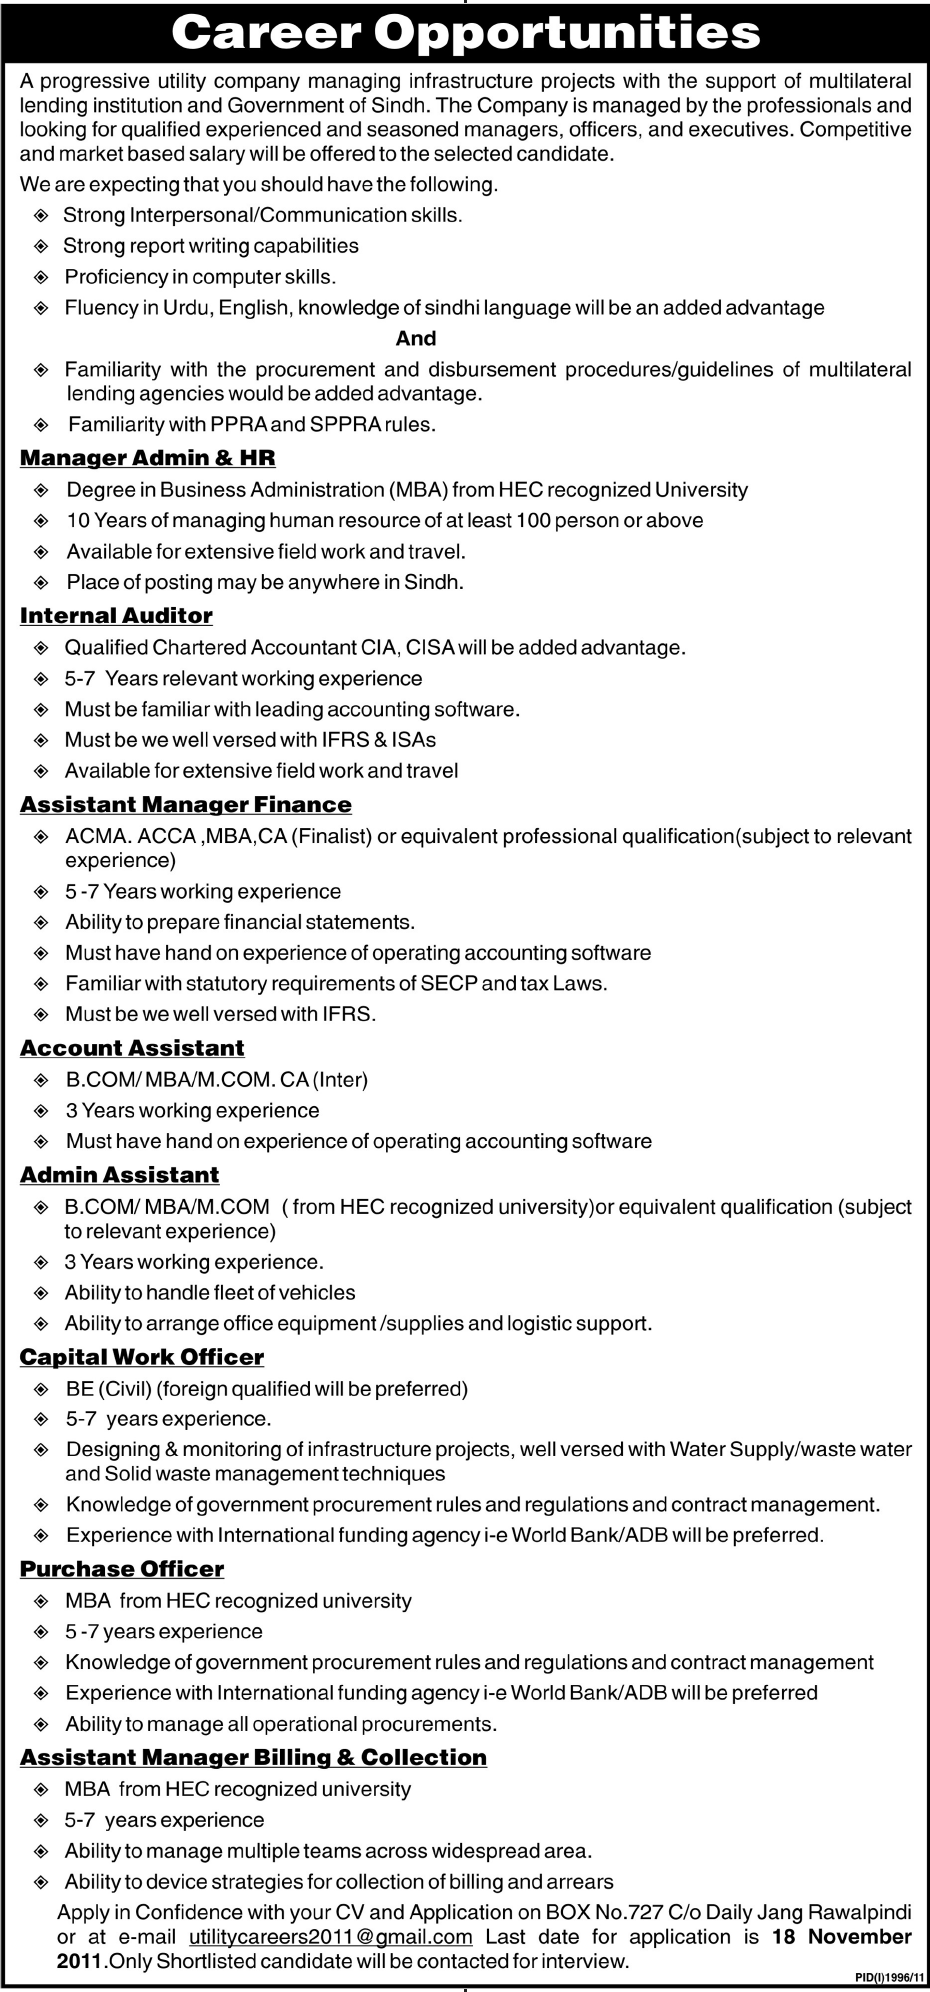 Managers, Officers and Executives Required by a Utility Company